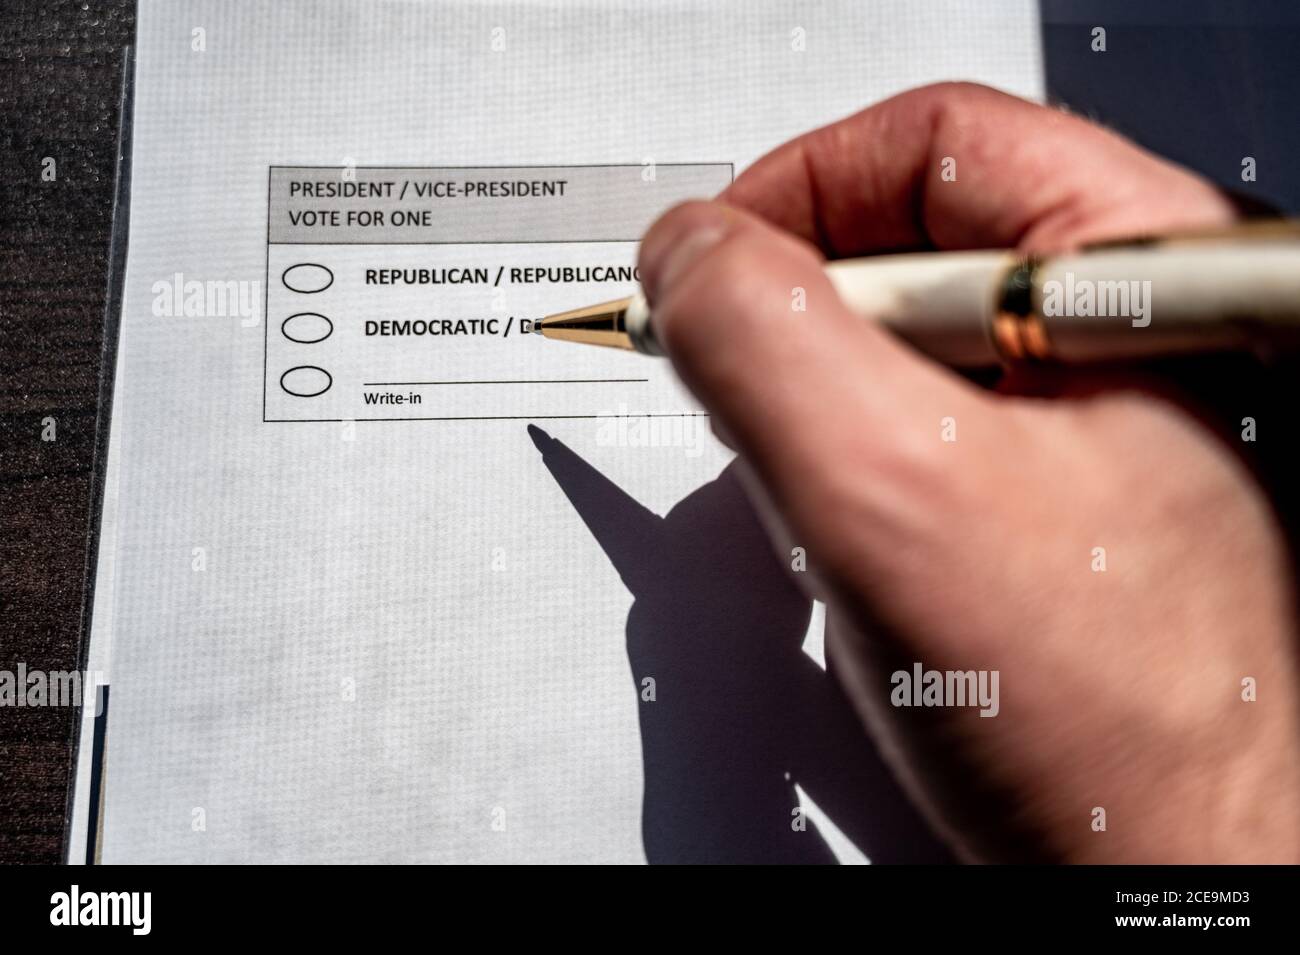 Concept of US presidential election ballot being completed Stock Photo